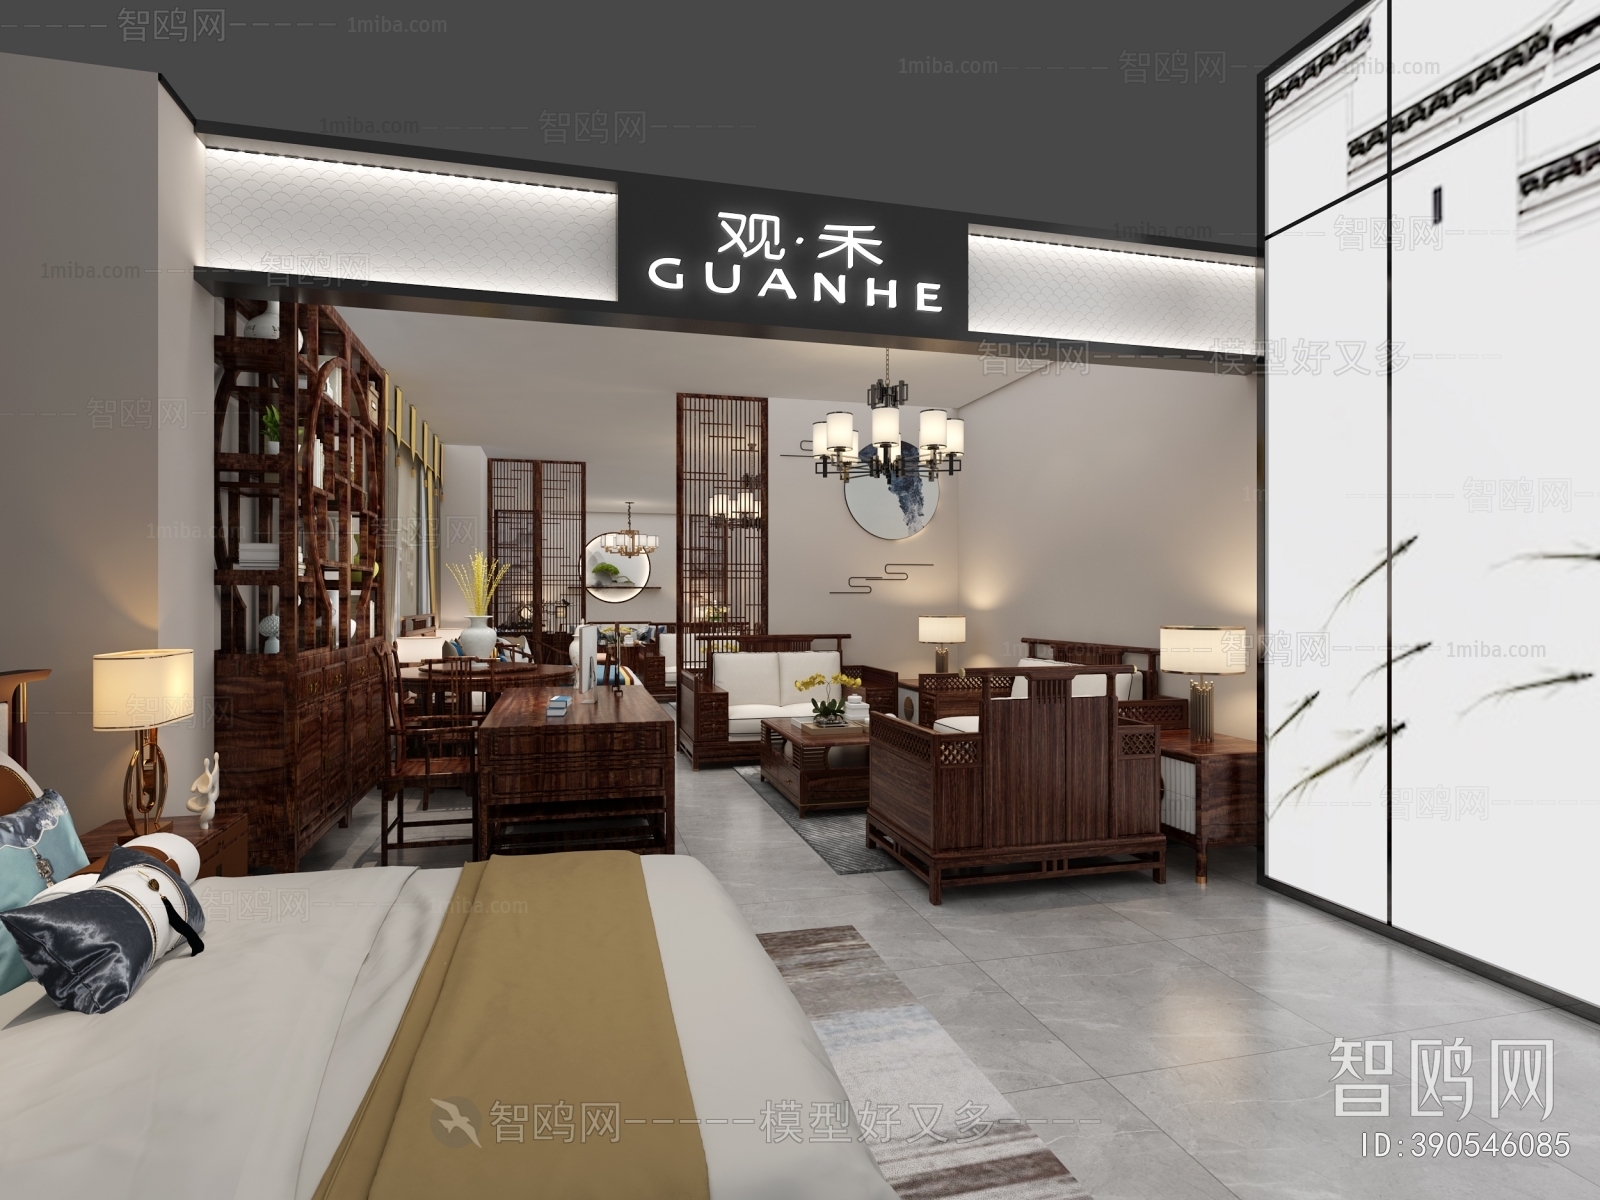 Chinese Style Furniture Shop